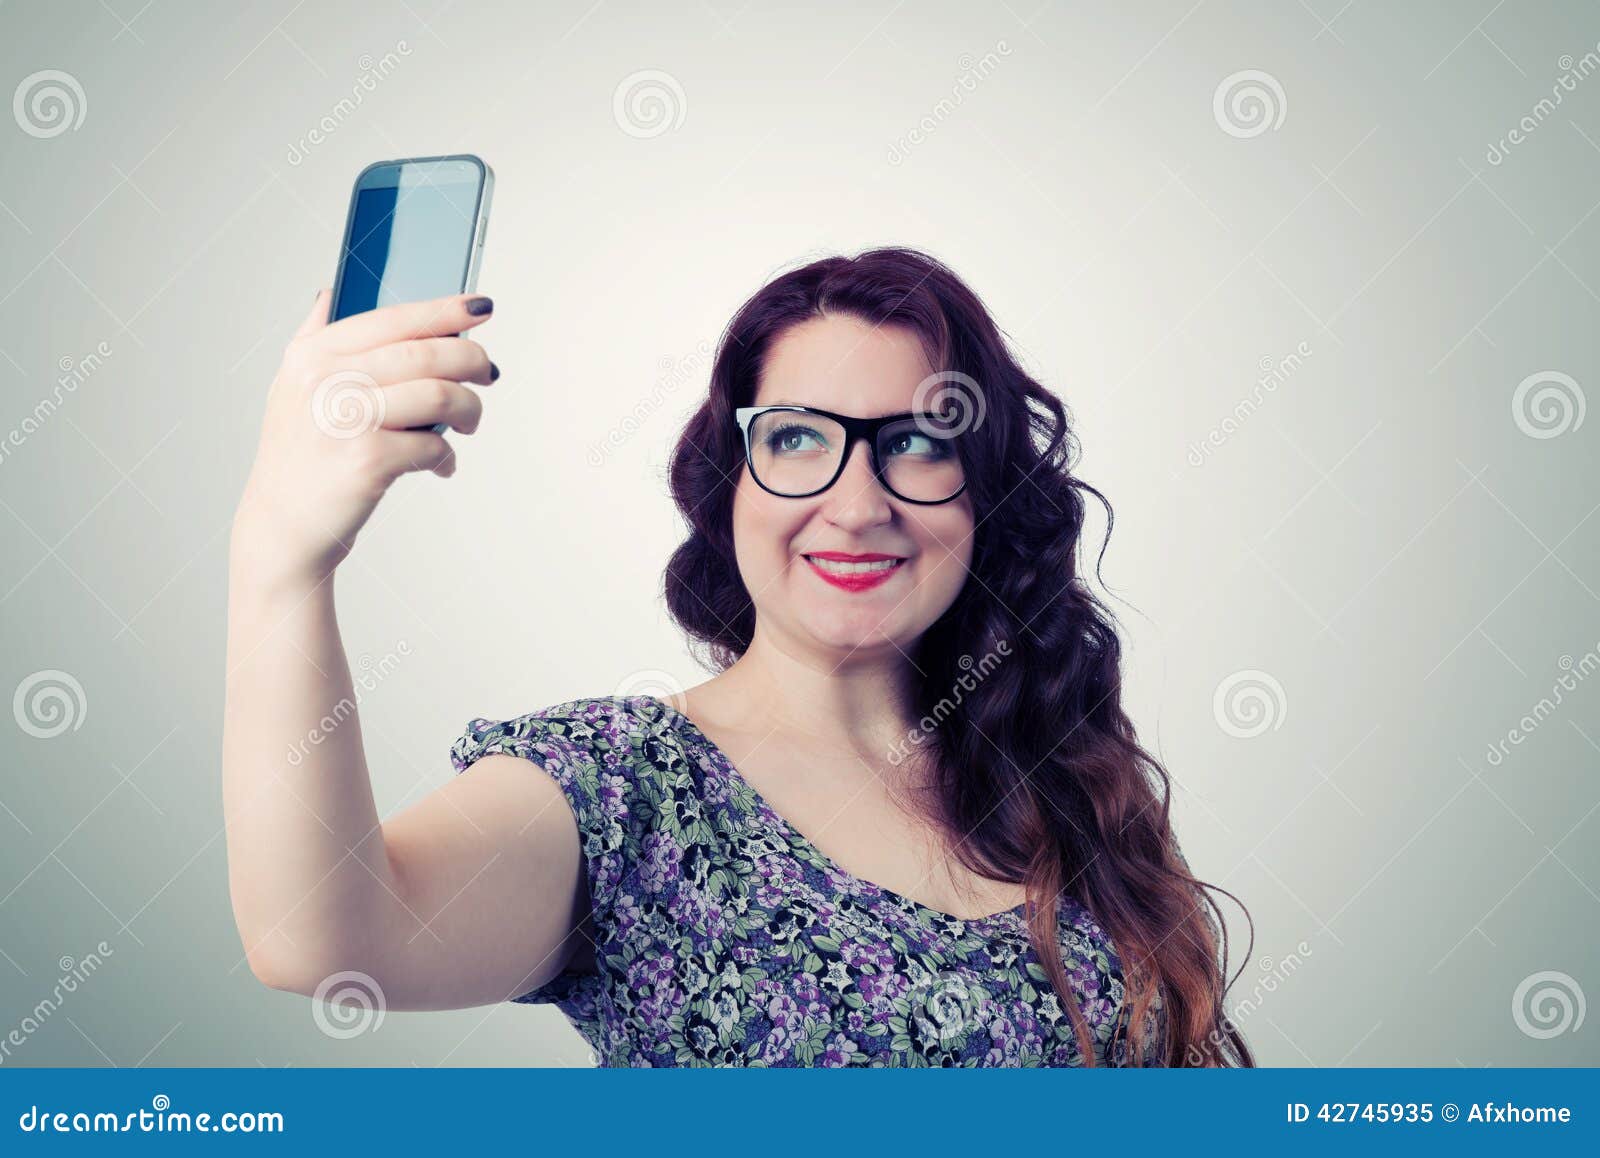 Funny Viper Girl Photographs Himself On Smartphone Stock Photo - Image